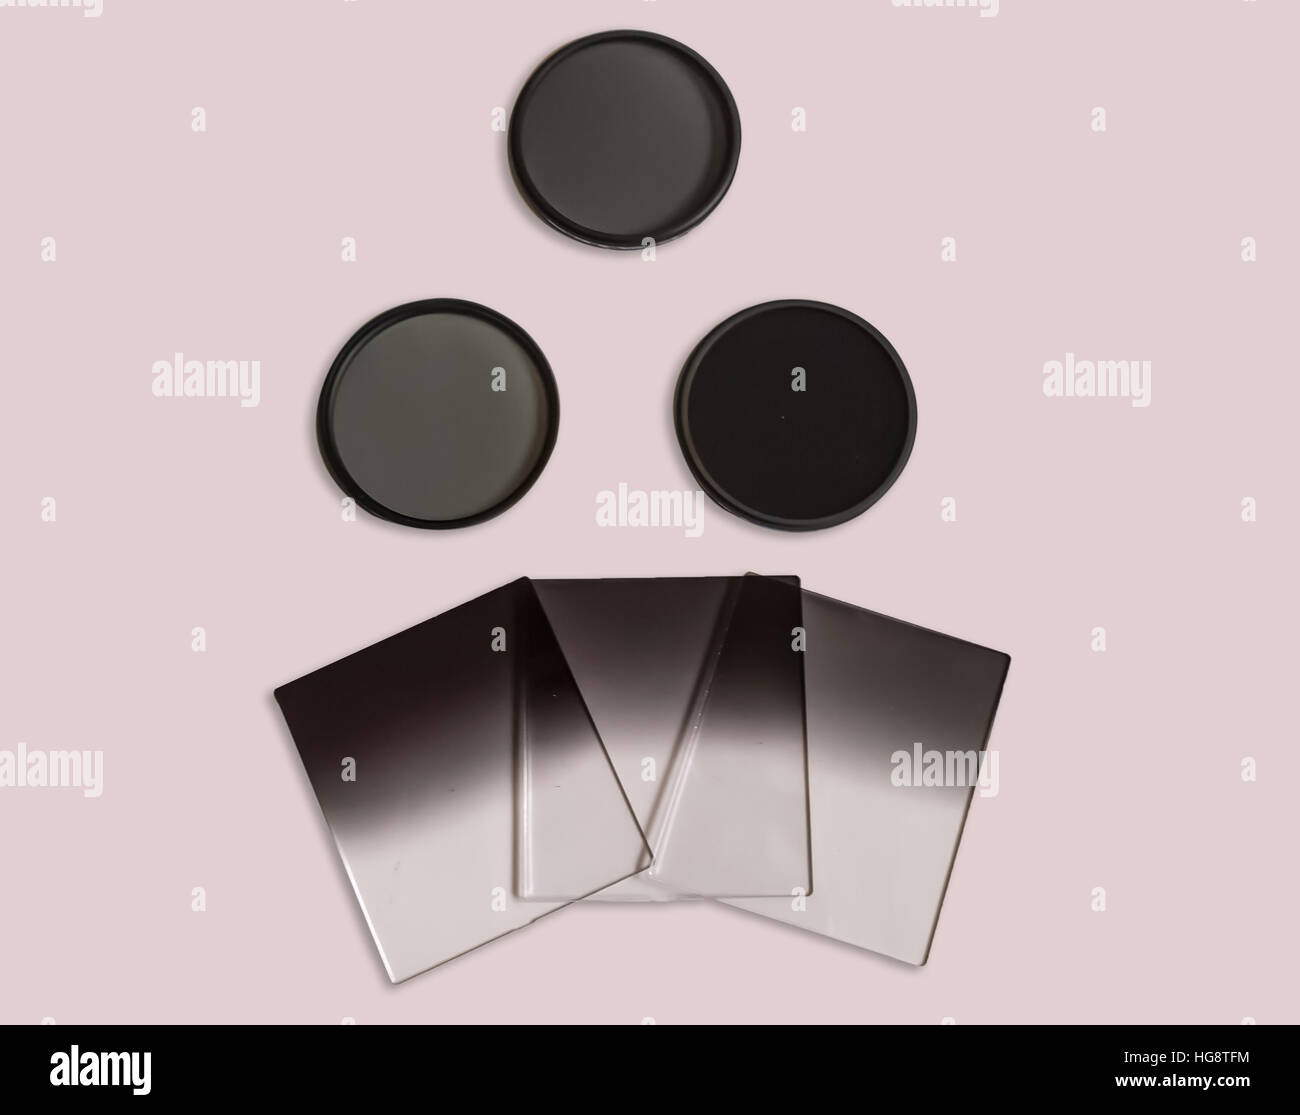 Neutral density and graduated neutral density filters used in camera for photography isolated. Stock Photo